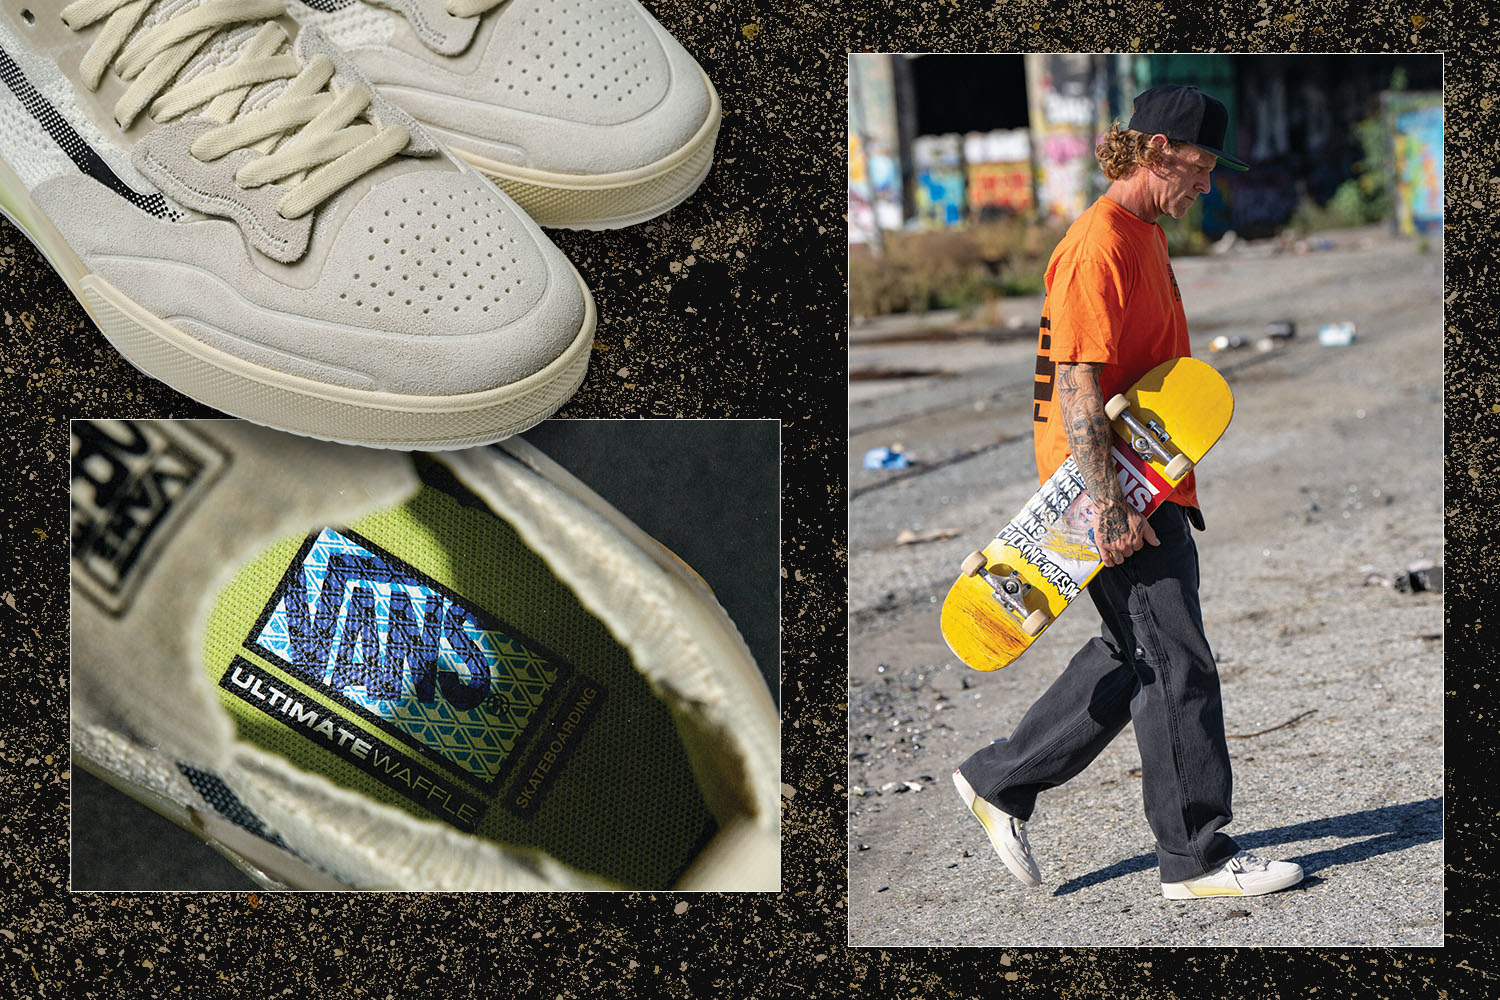 AVE walks with skateboard wearing casual attire and white sneakers. Close-up of sneaker label shown